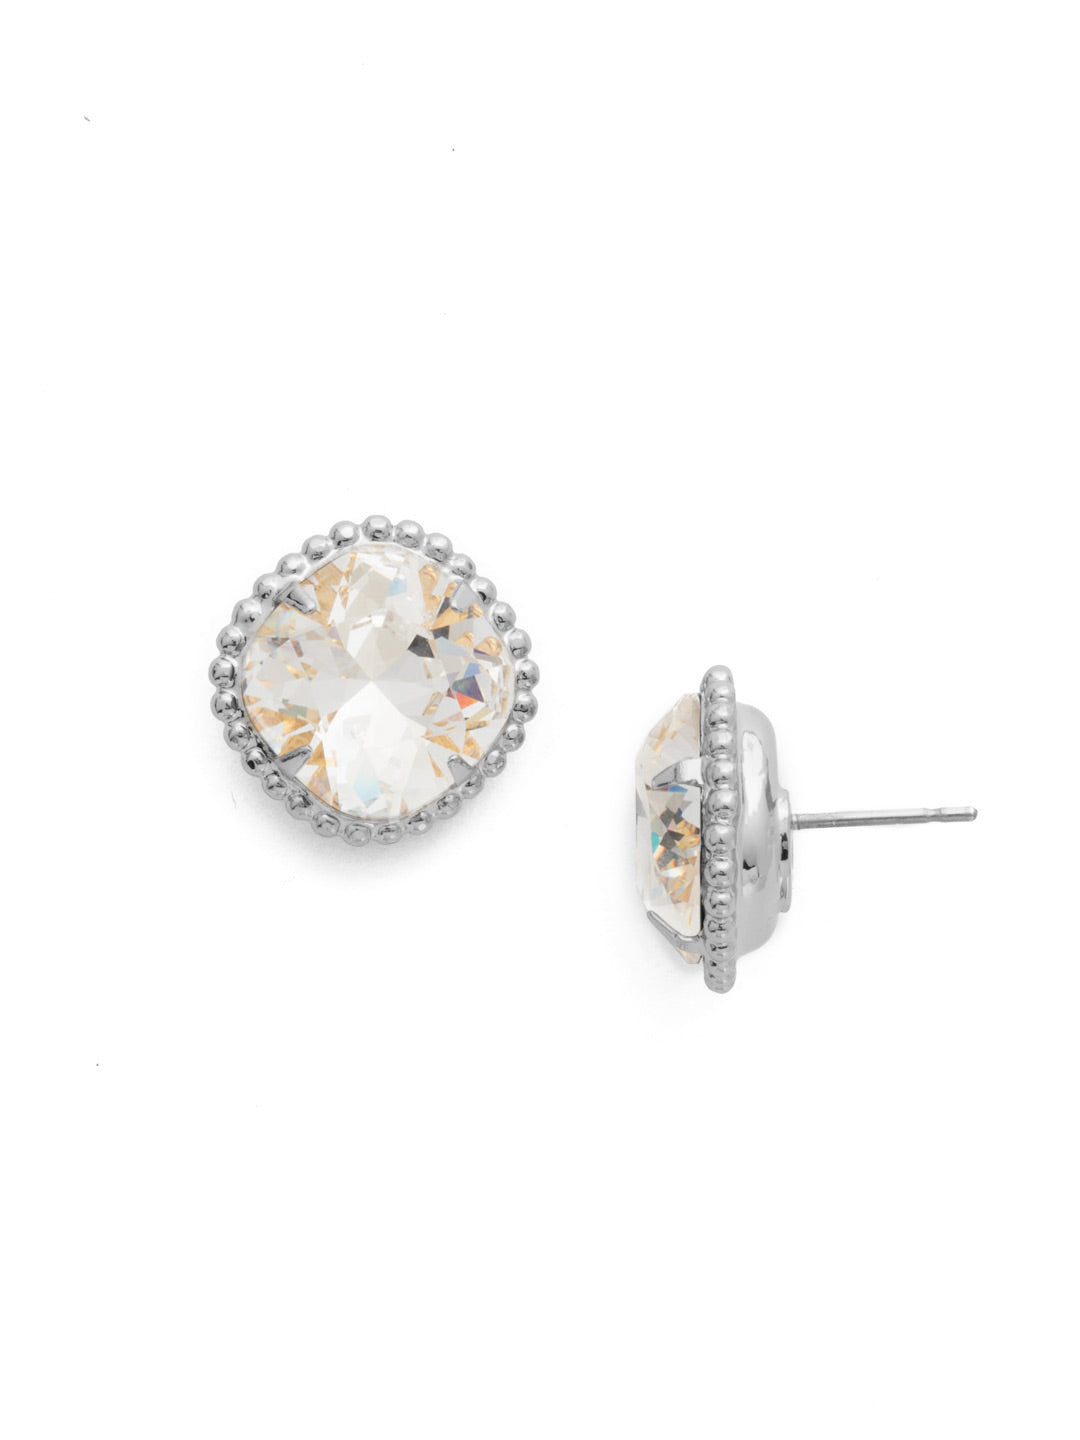 Cushion-Cut Solitaire Stud Earrings - EBX10PDCRY